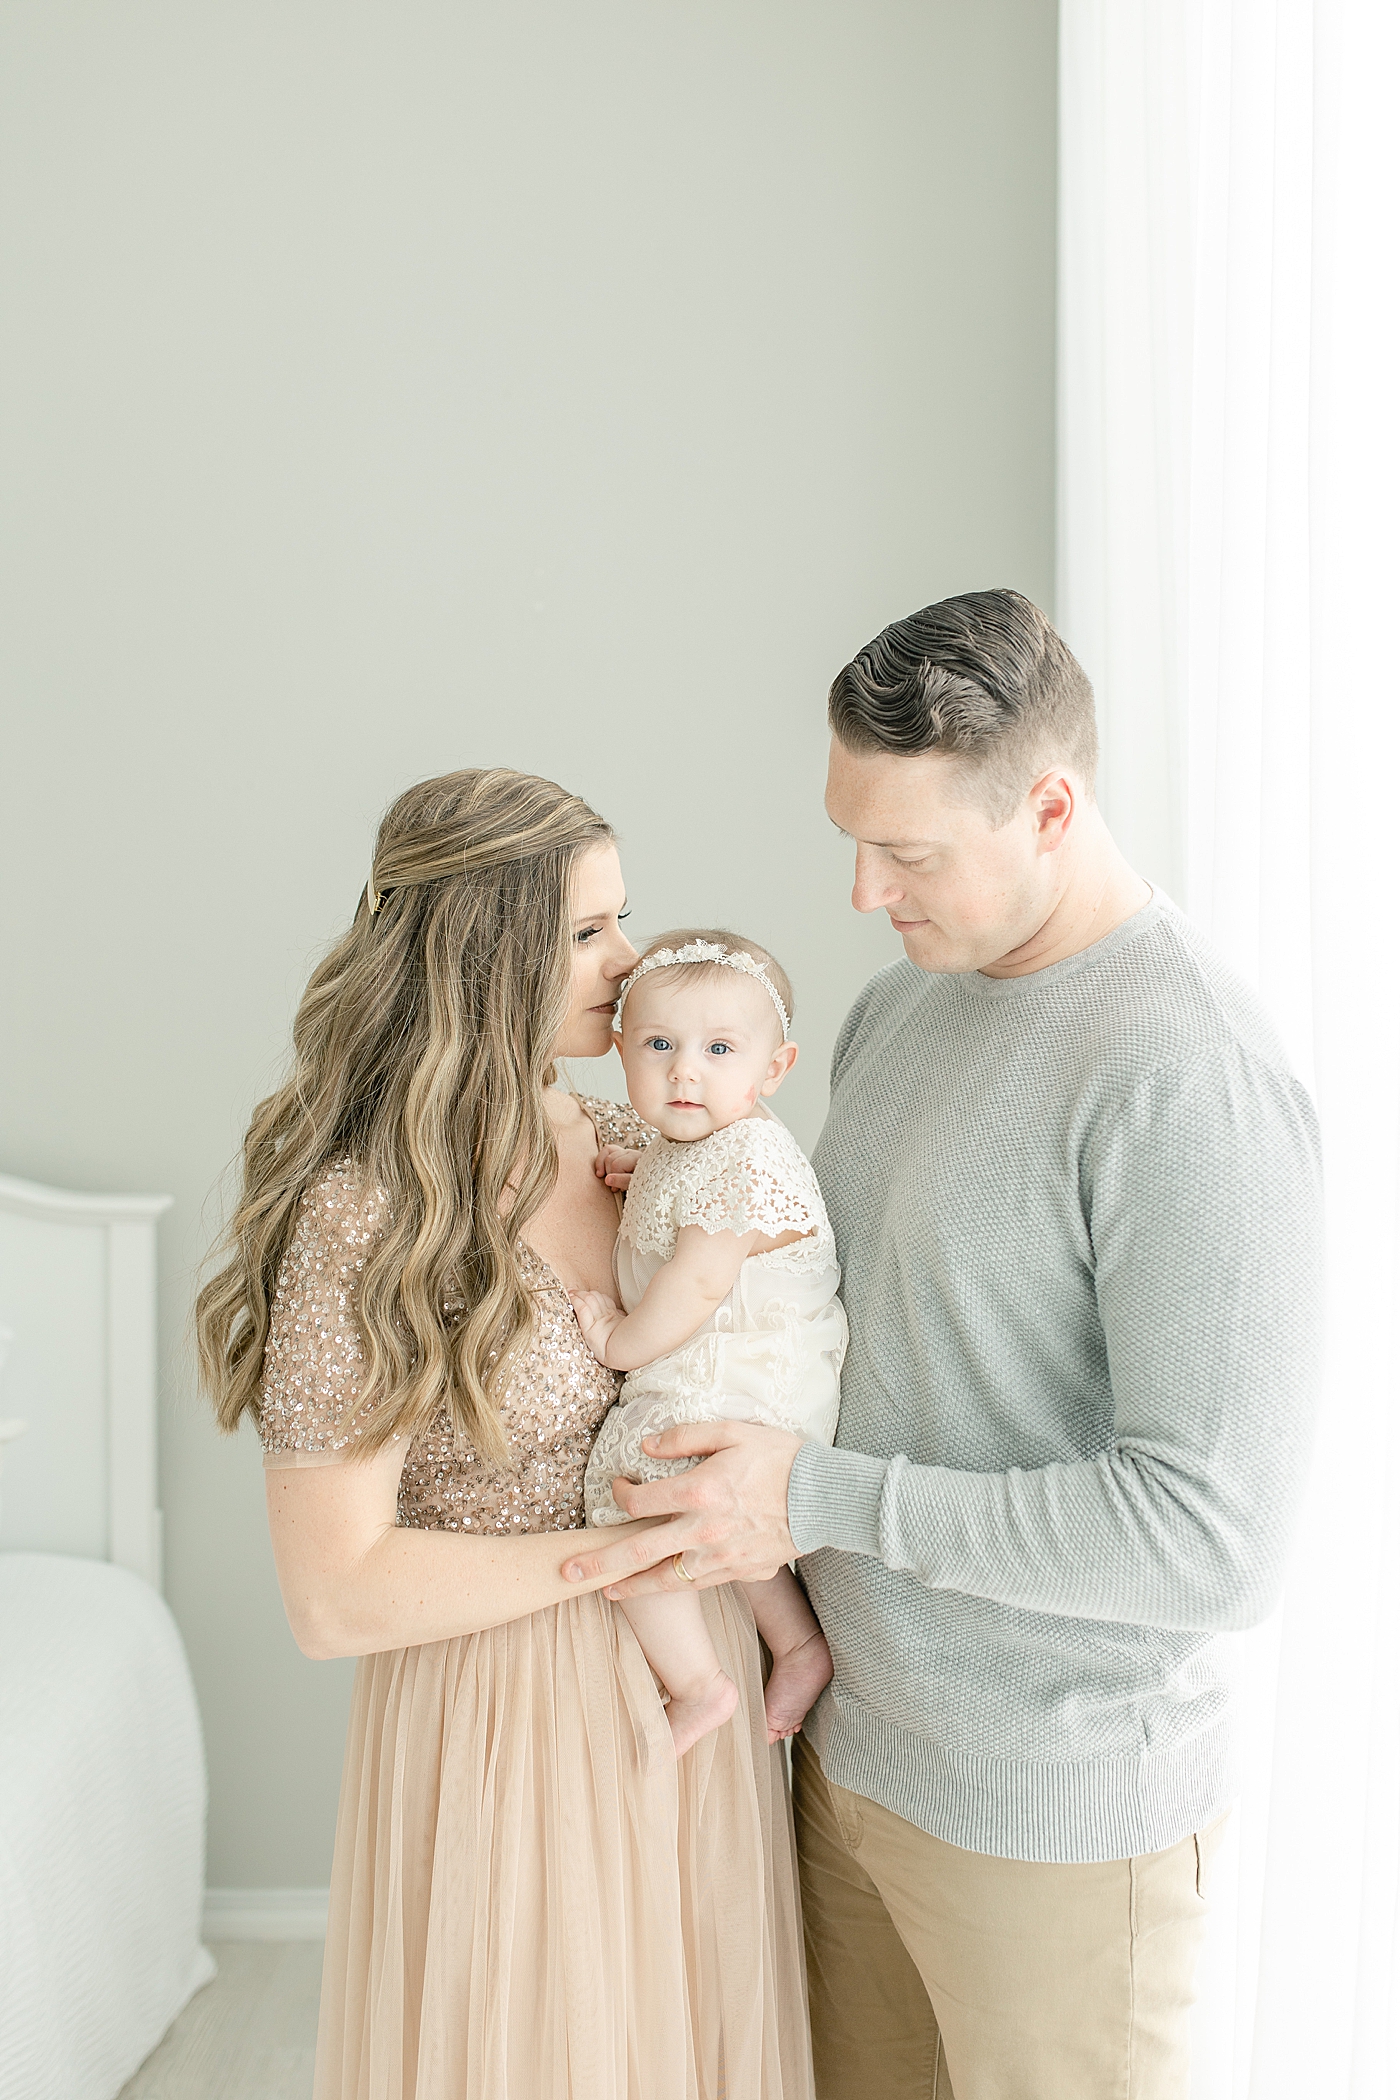 Mom and dad kissing their baby girl for six month milestone session | Photo by Little Sunshine Photography